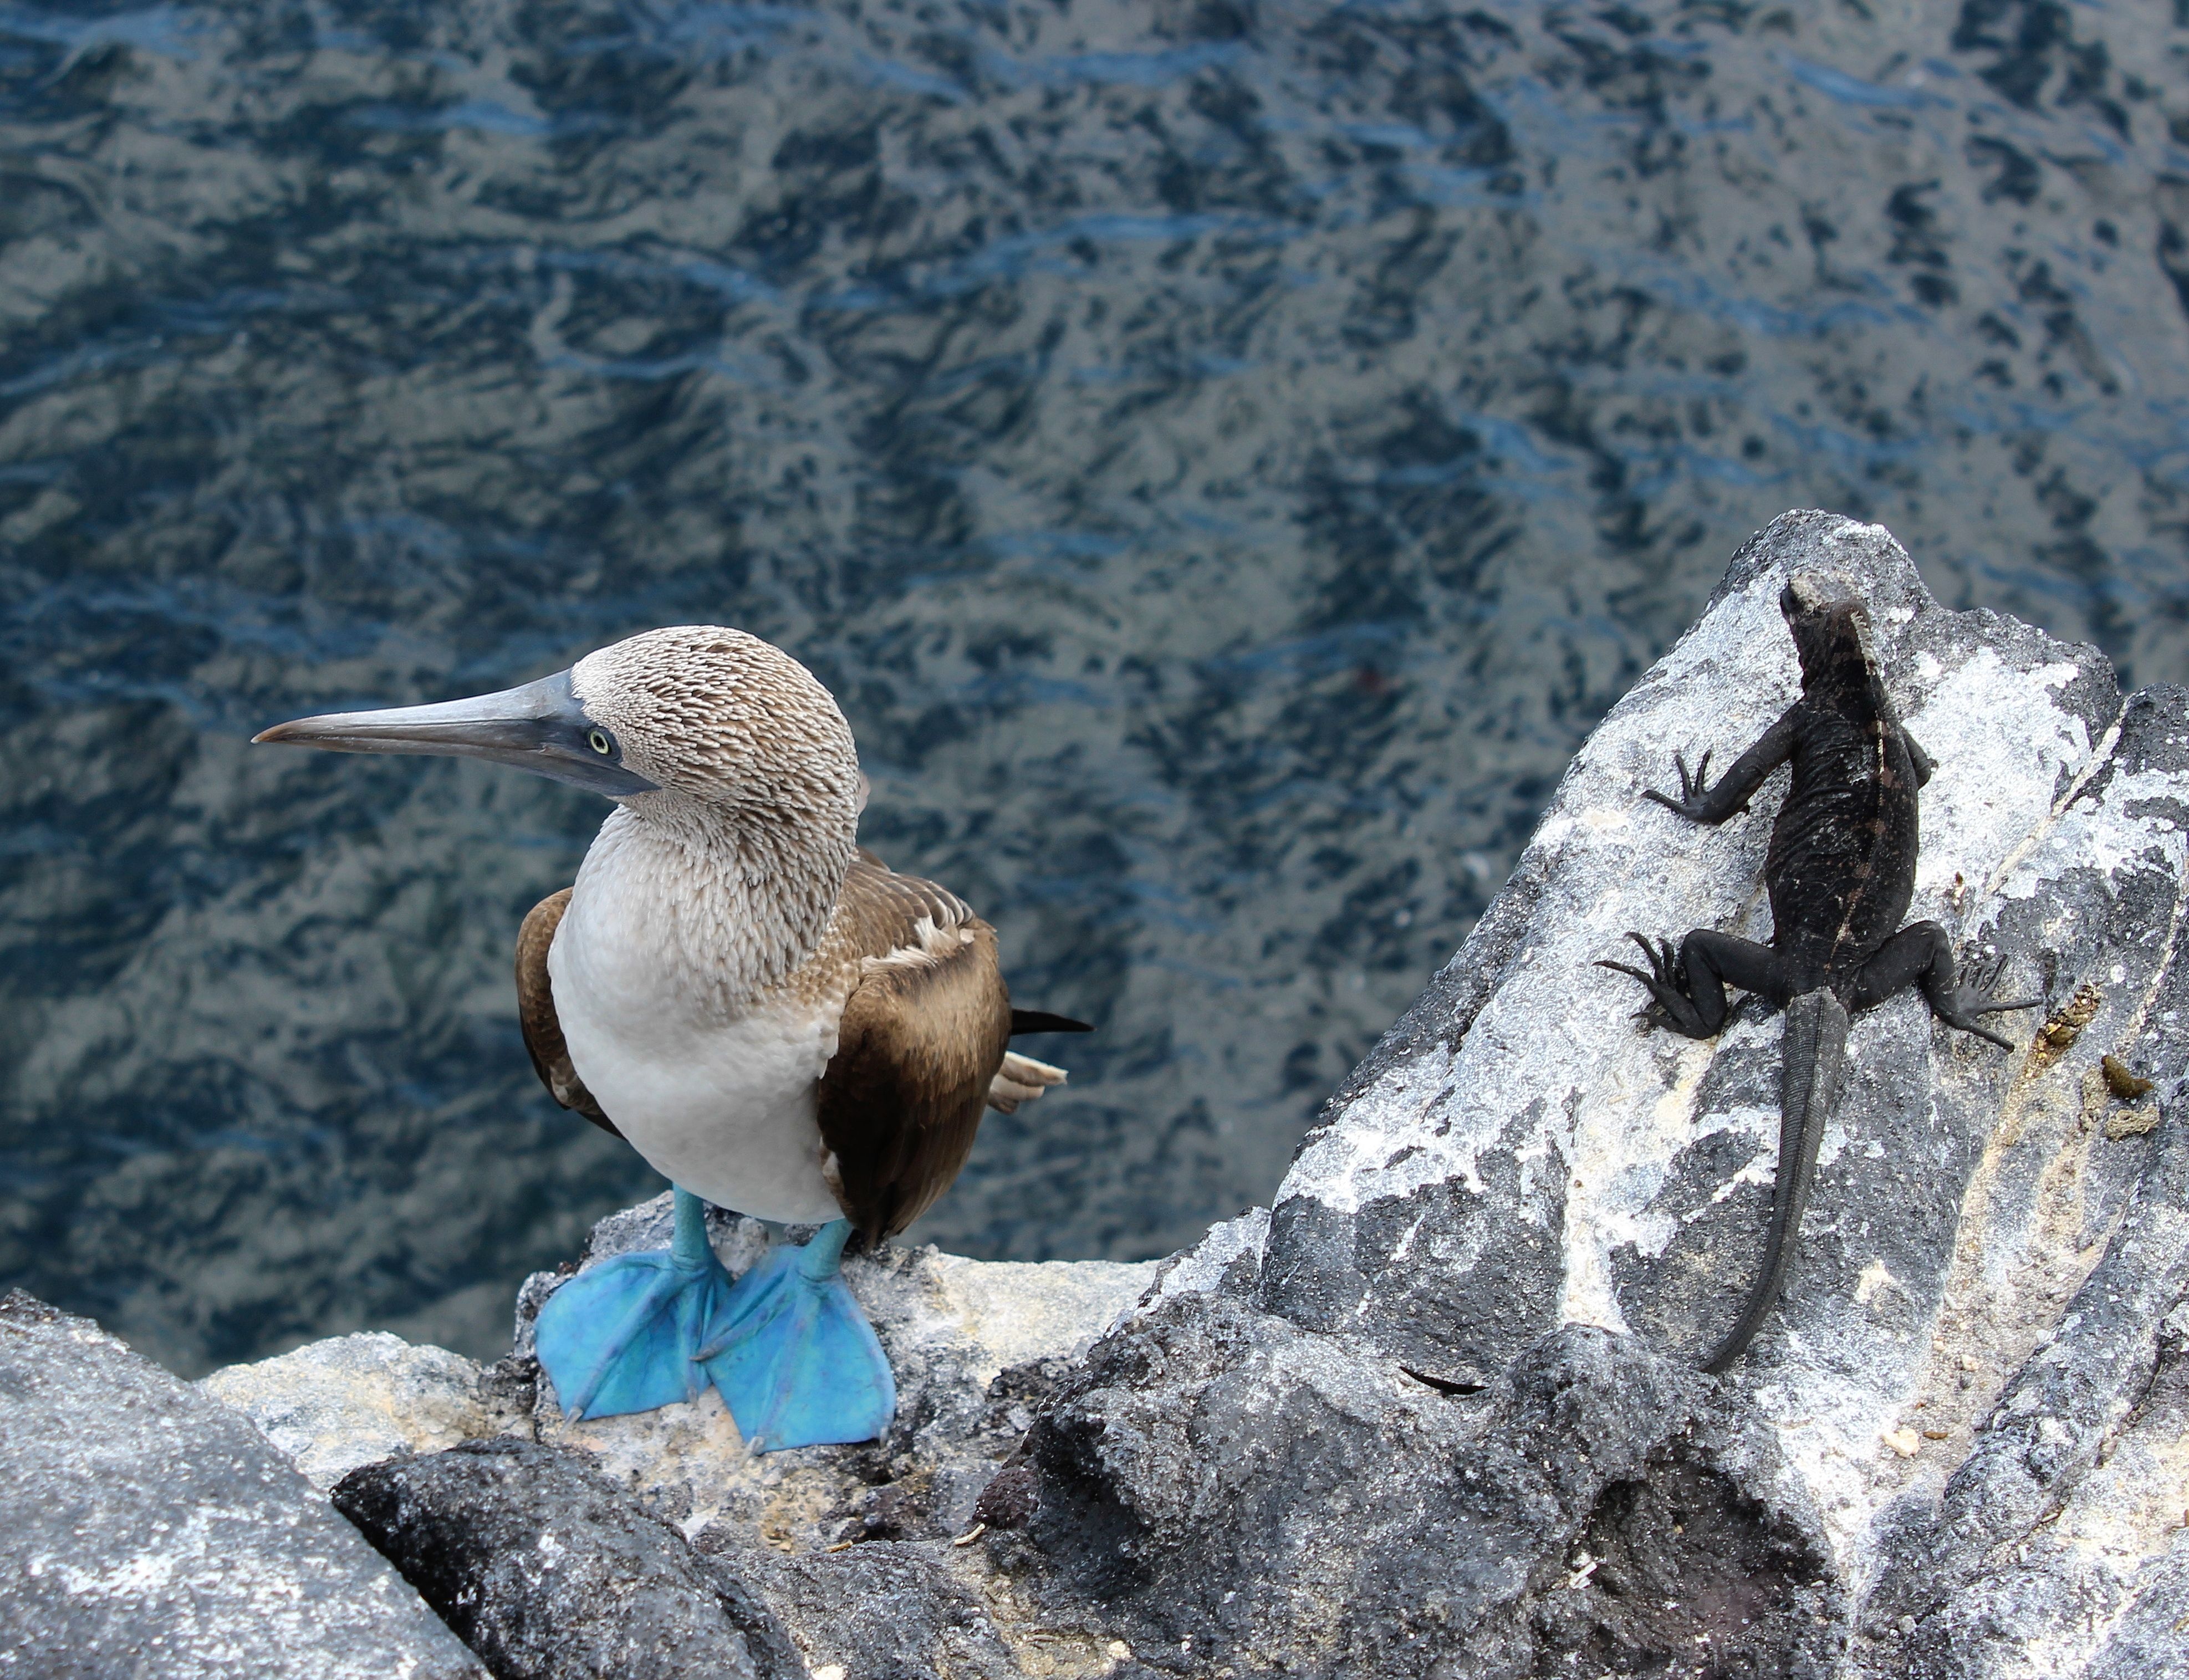 Blue-footed Booby HD wallpapers, Desktop wallpaper - most viewed